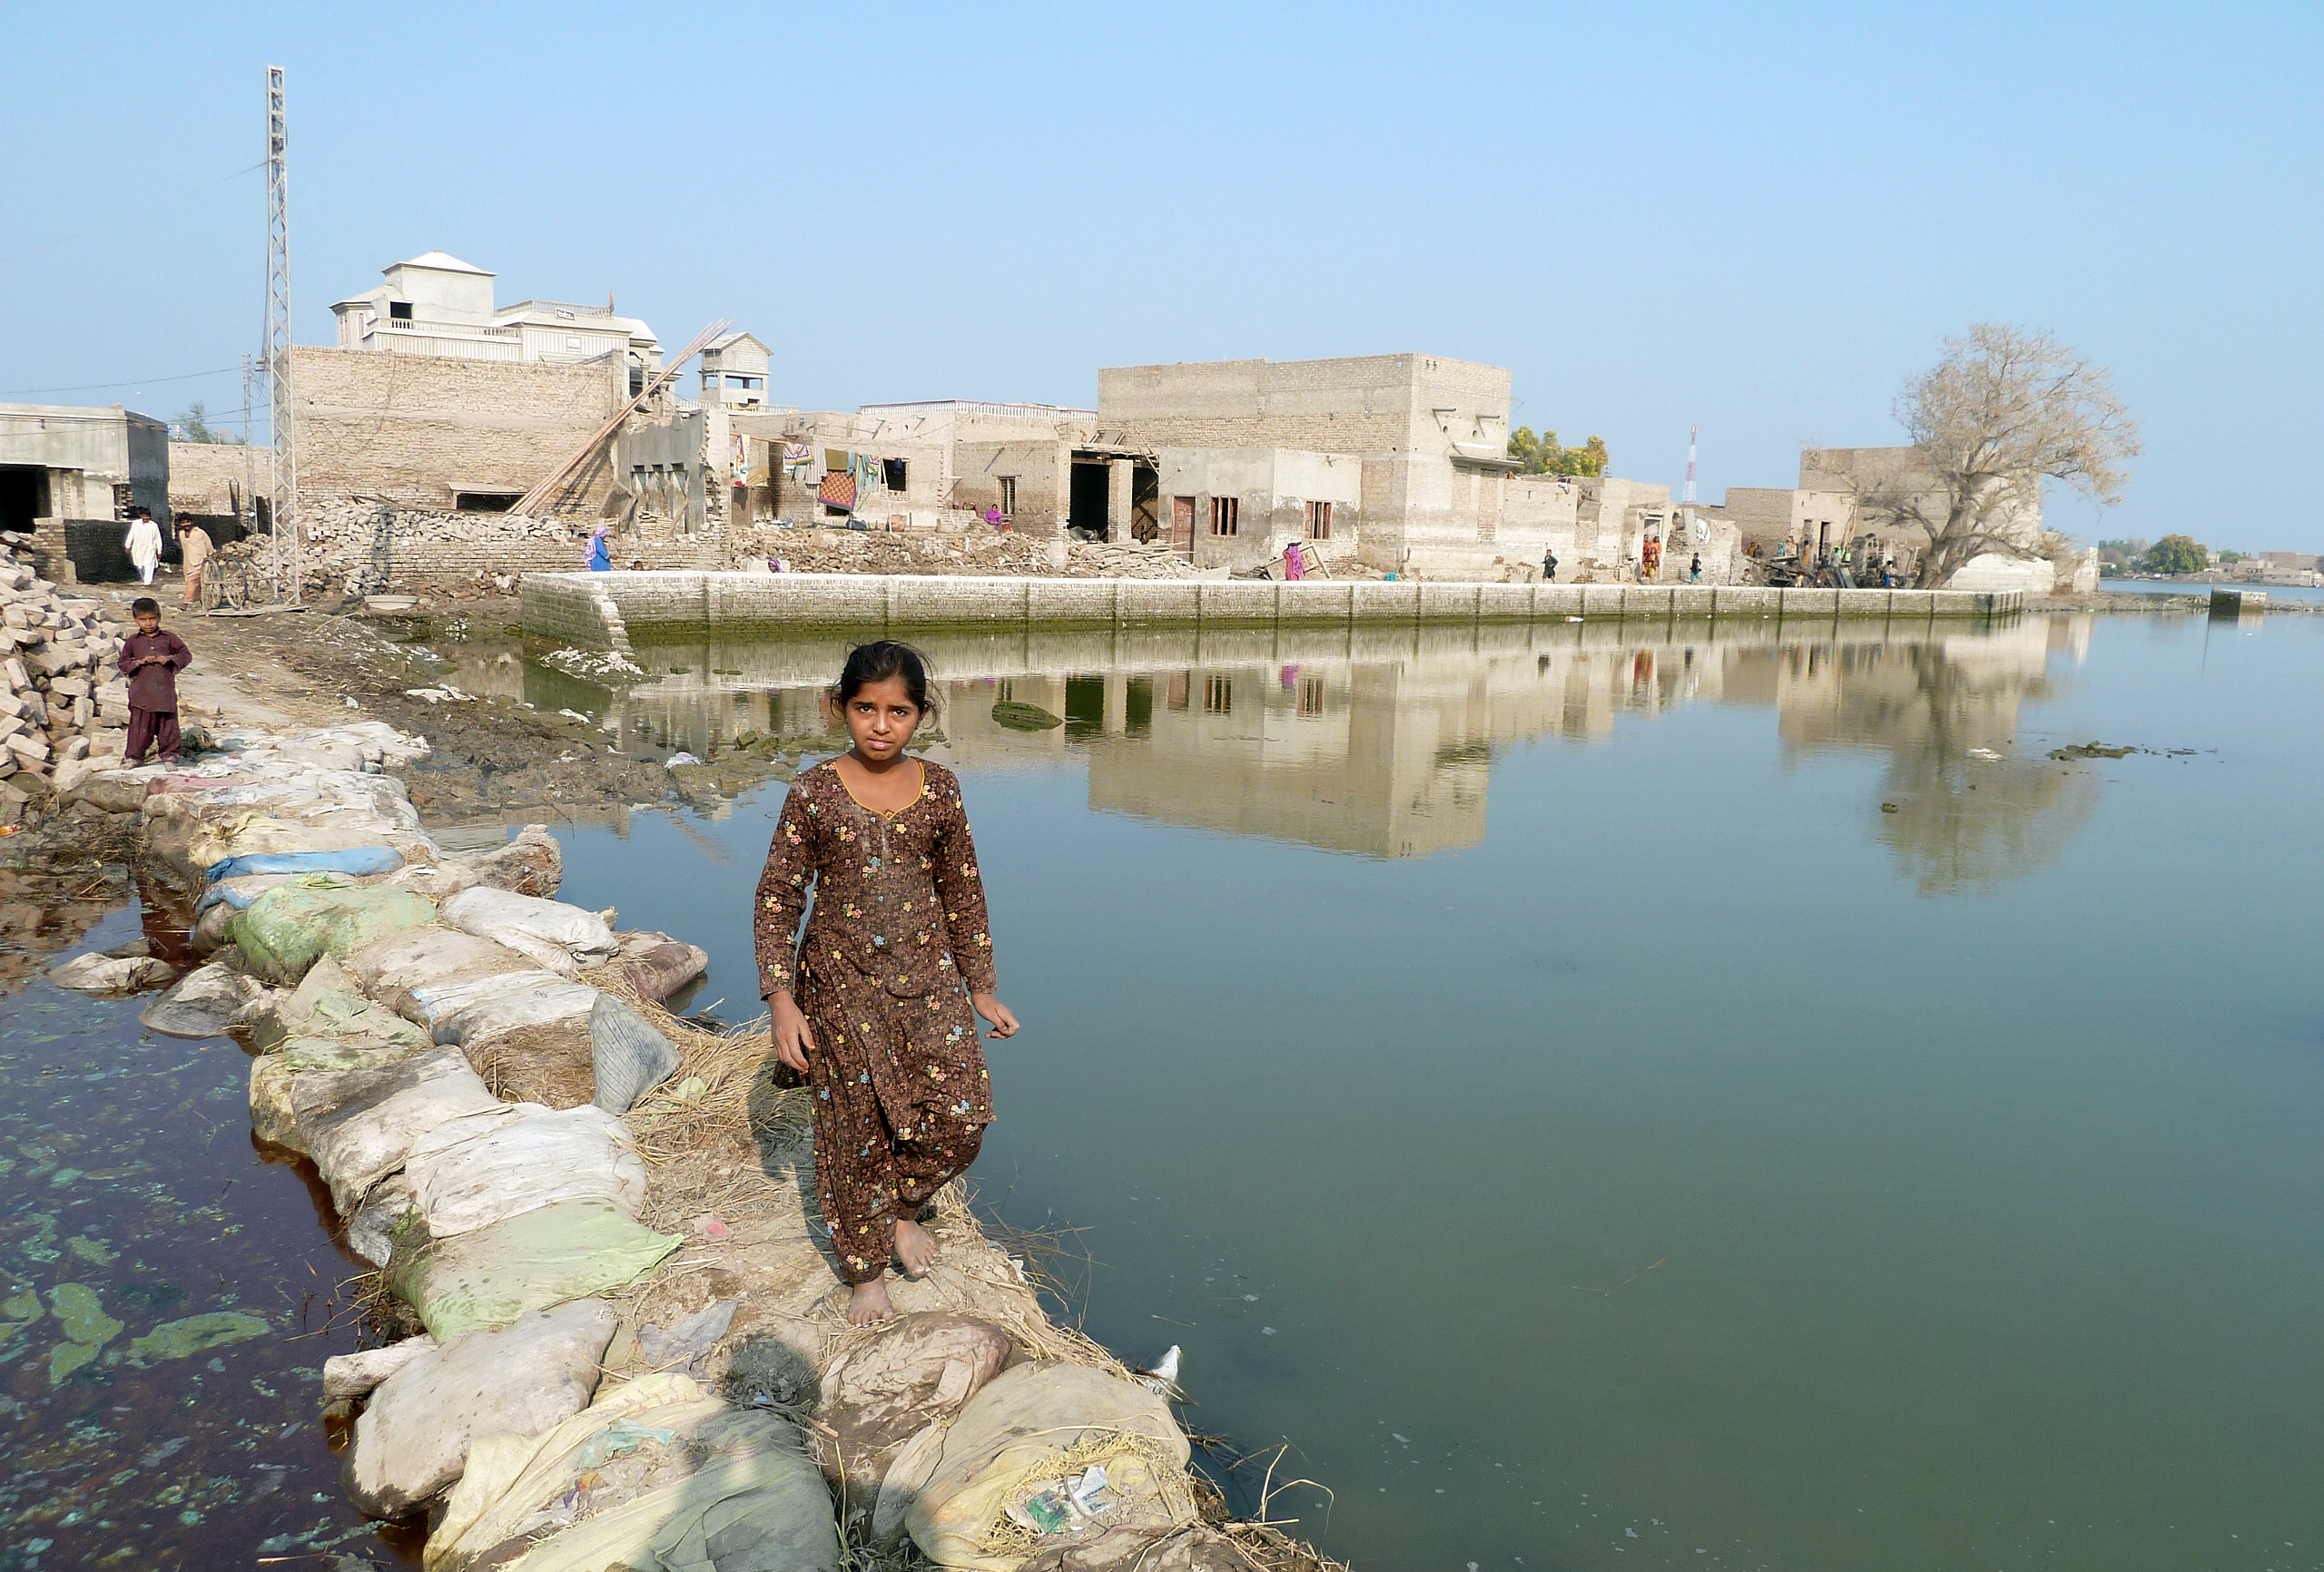 A young girl on a makeshift bridge after flooding in Sindh province, Pakistan.